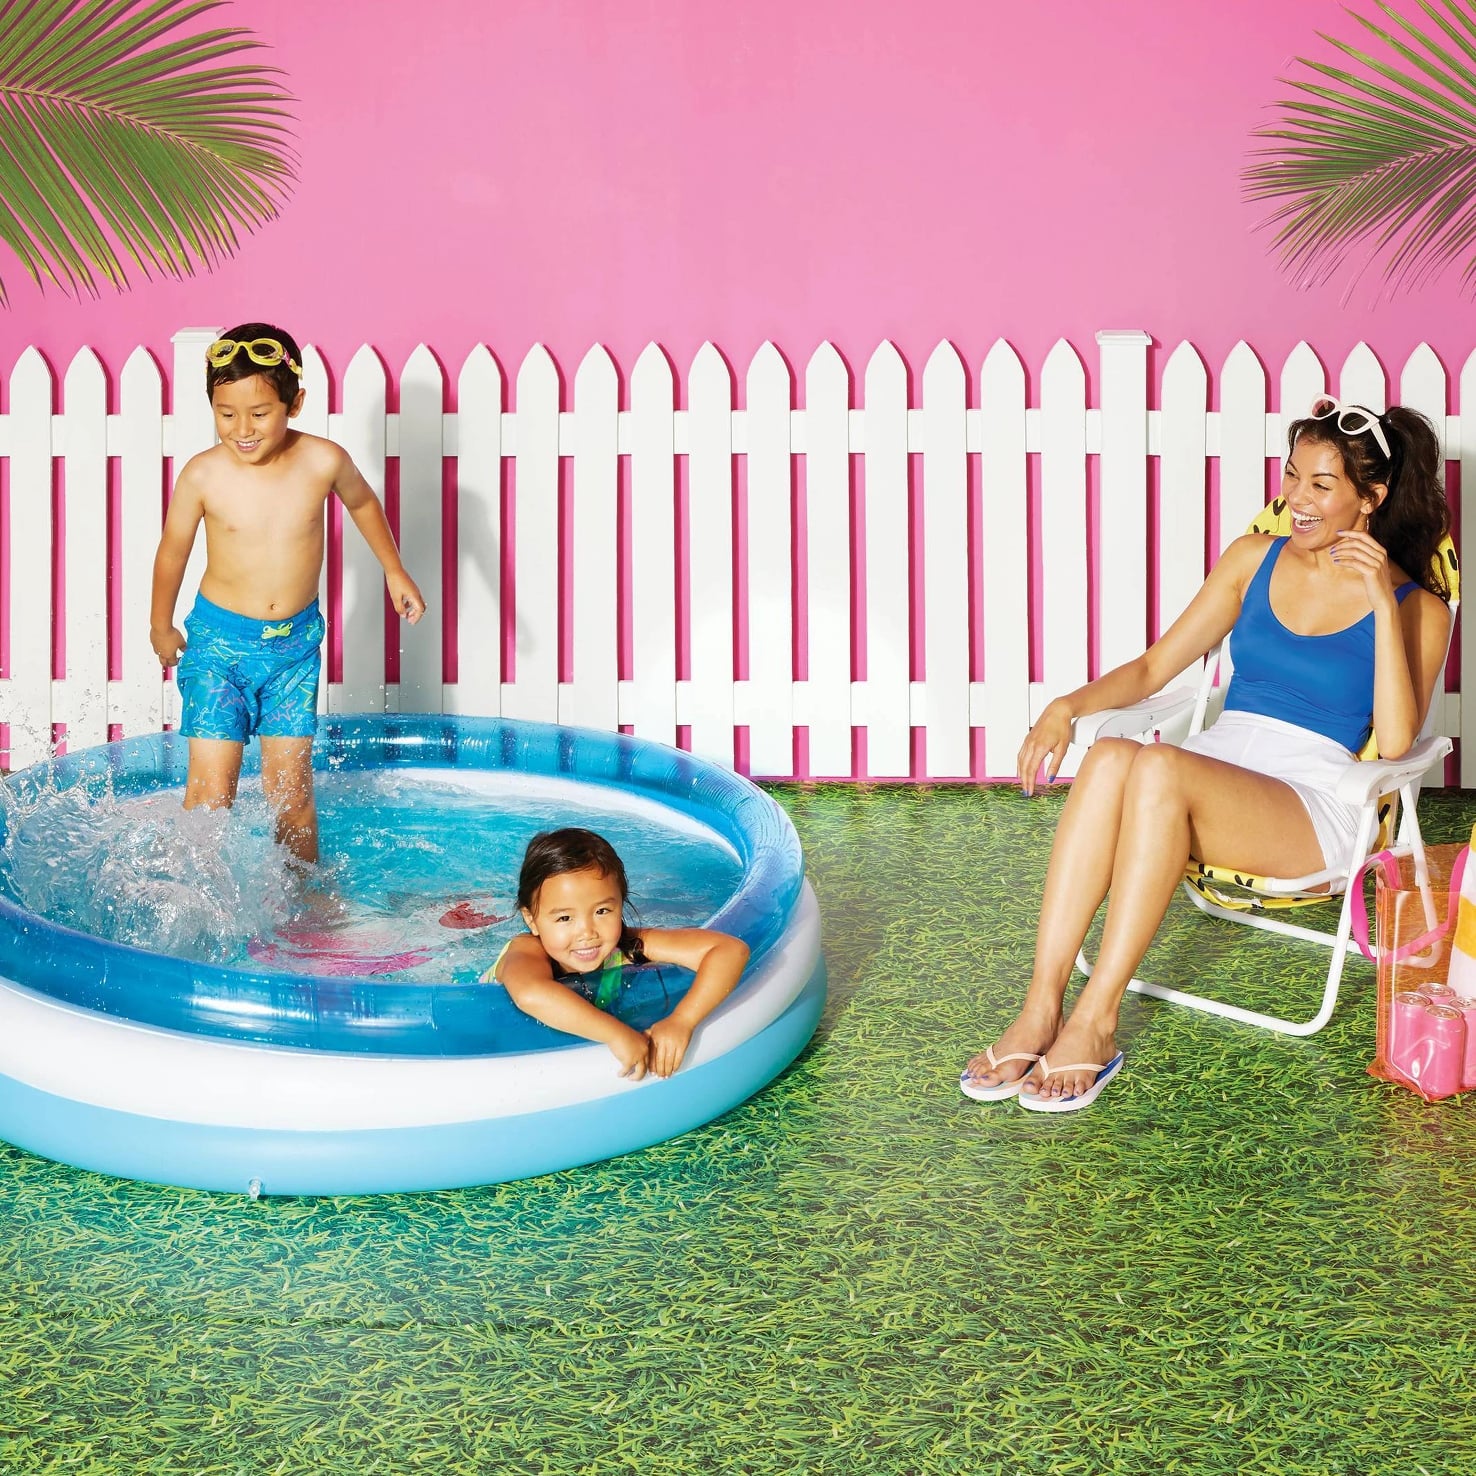 Details about   Peradix Kiddie Pool Inflatable Pool for Kids and Adults Family Swimming Pool... 